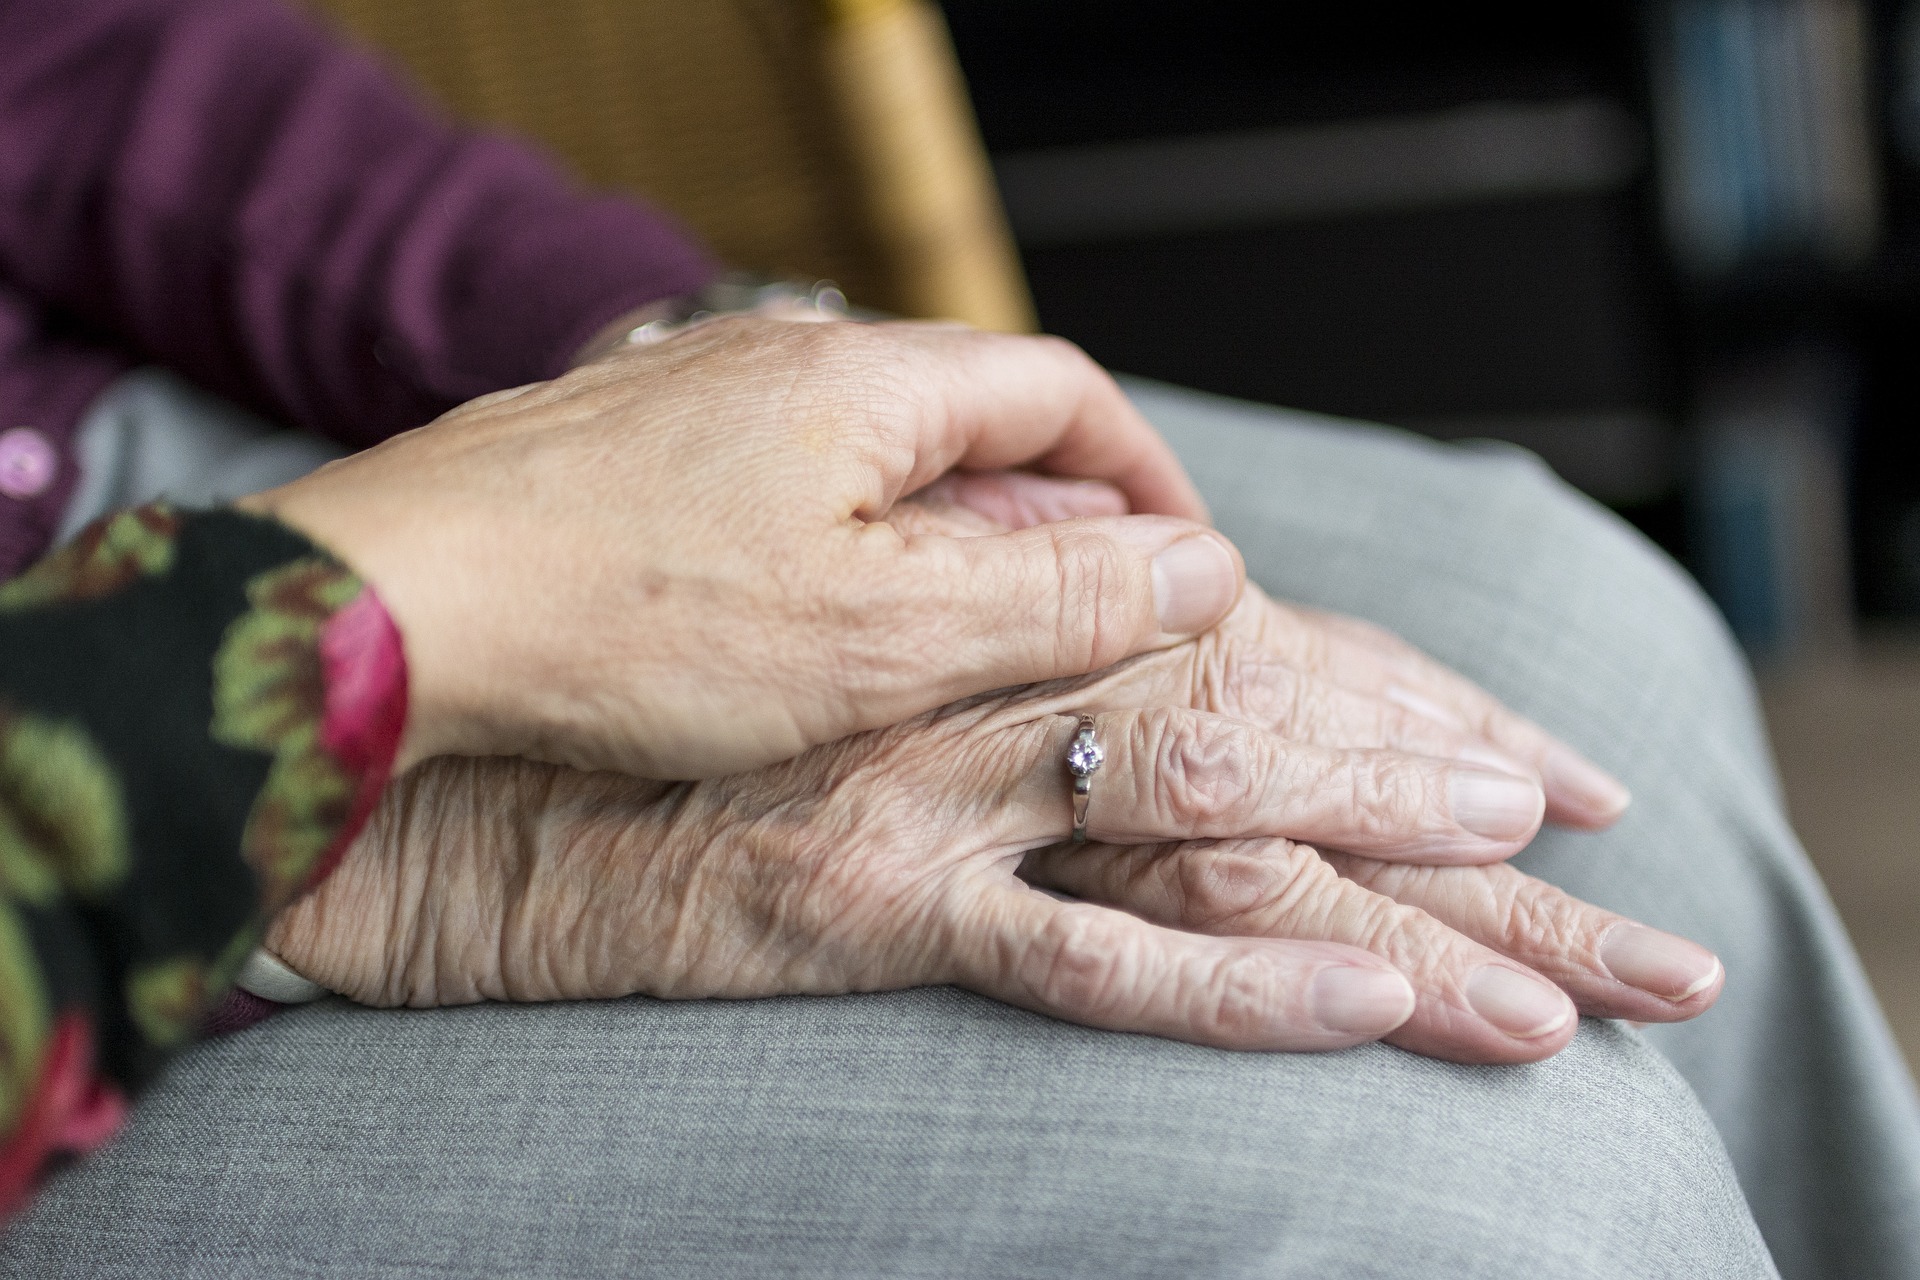 Close up image of a female with her hand on an older female's hand